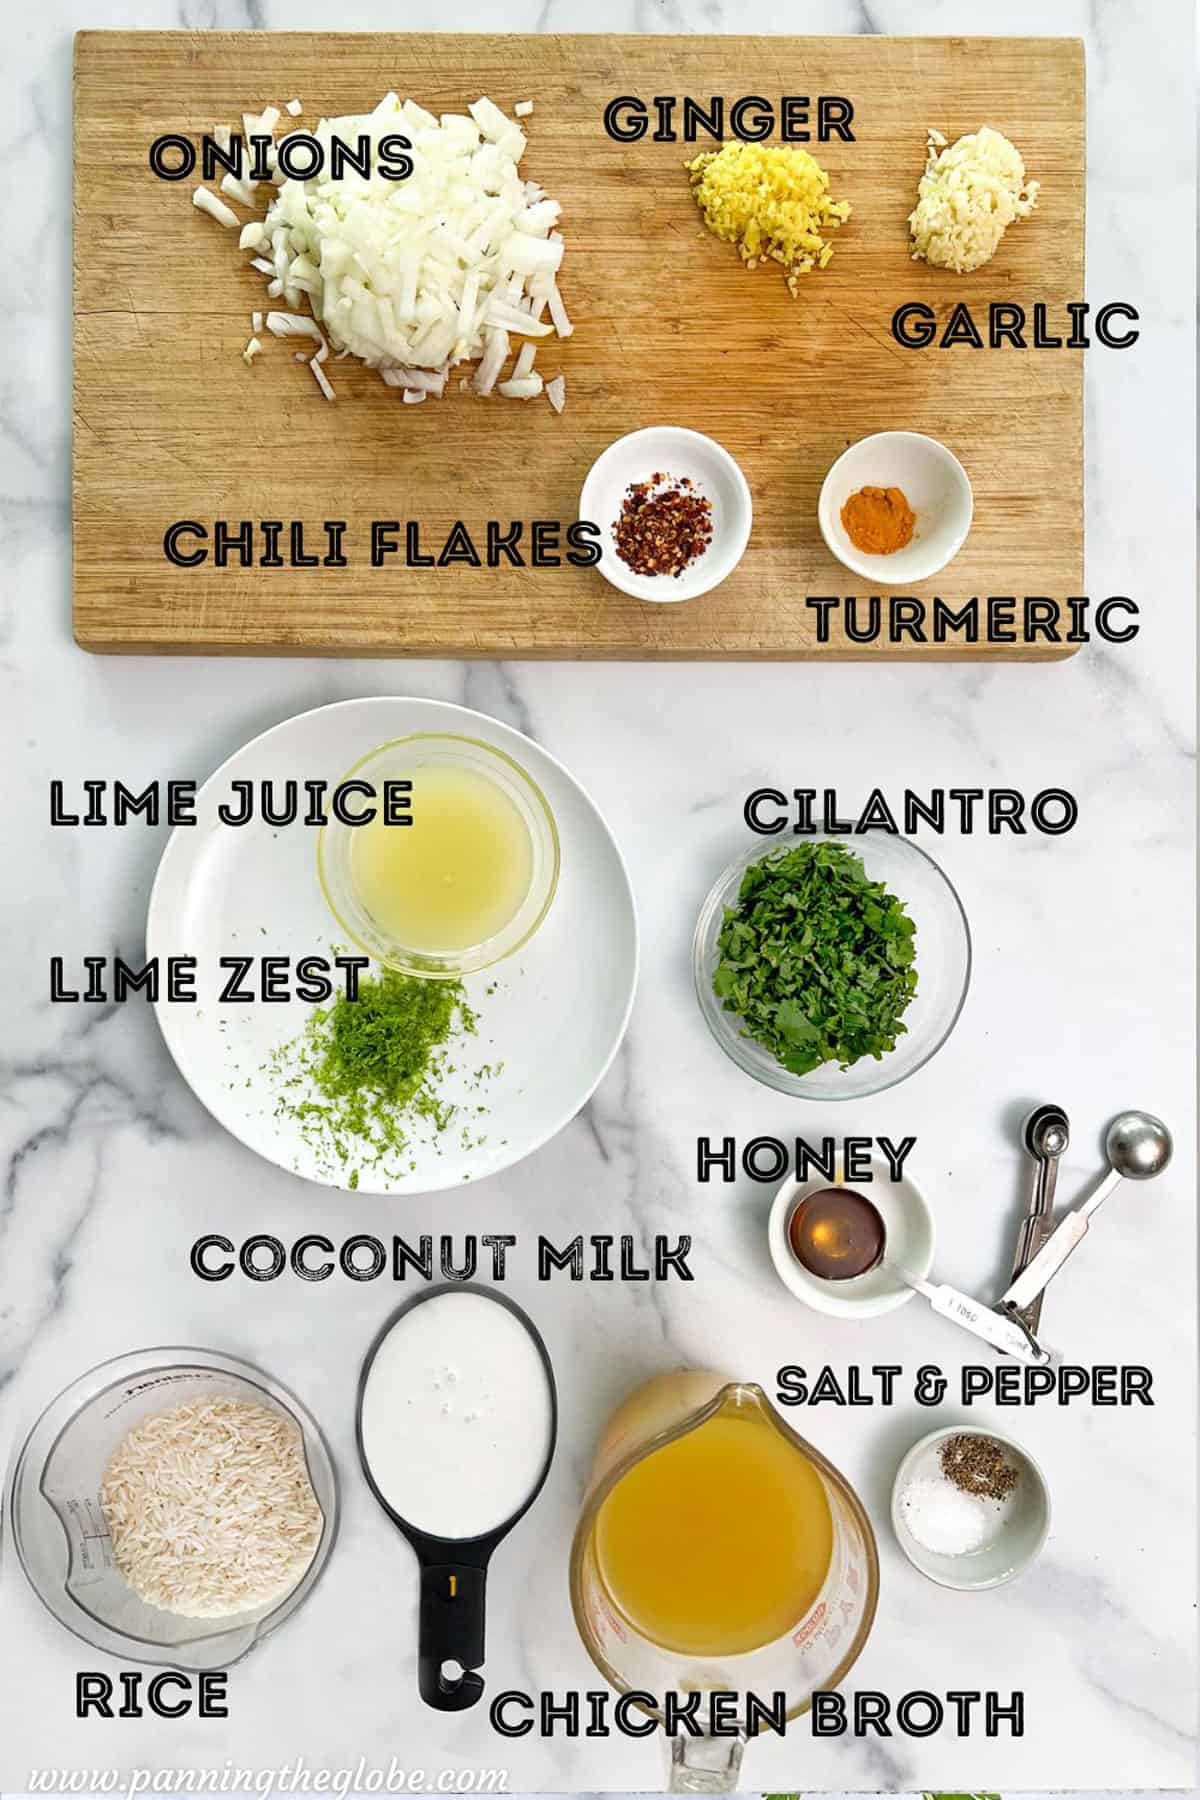 Prepped ingredients on a marble counter: chopped onions, garlic, ginger, cilantro, lime zest, lime juice, coconut milk, rice, honey turmeric, and chili flakes.